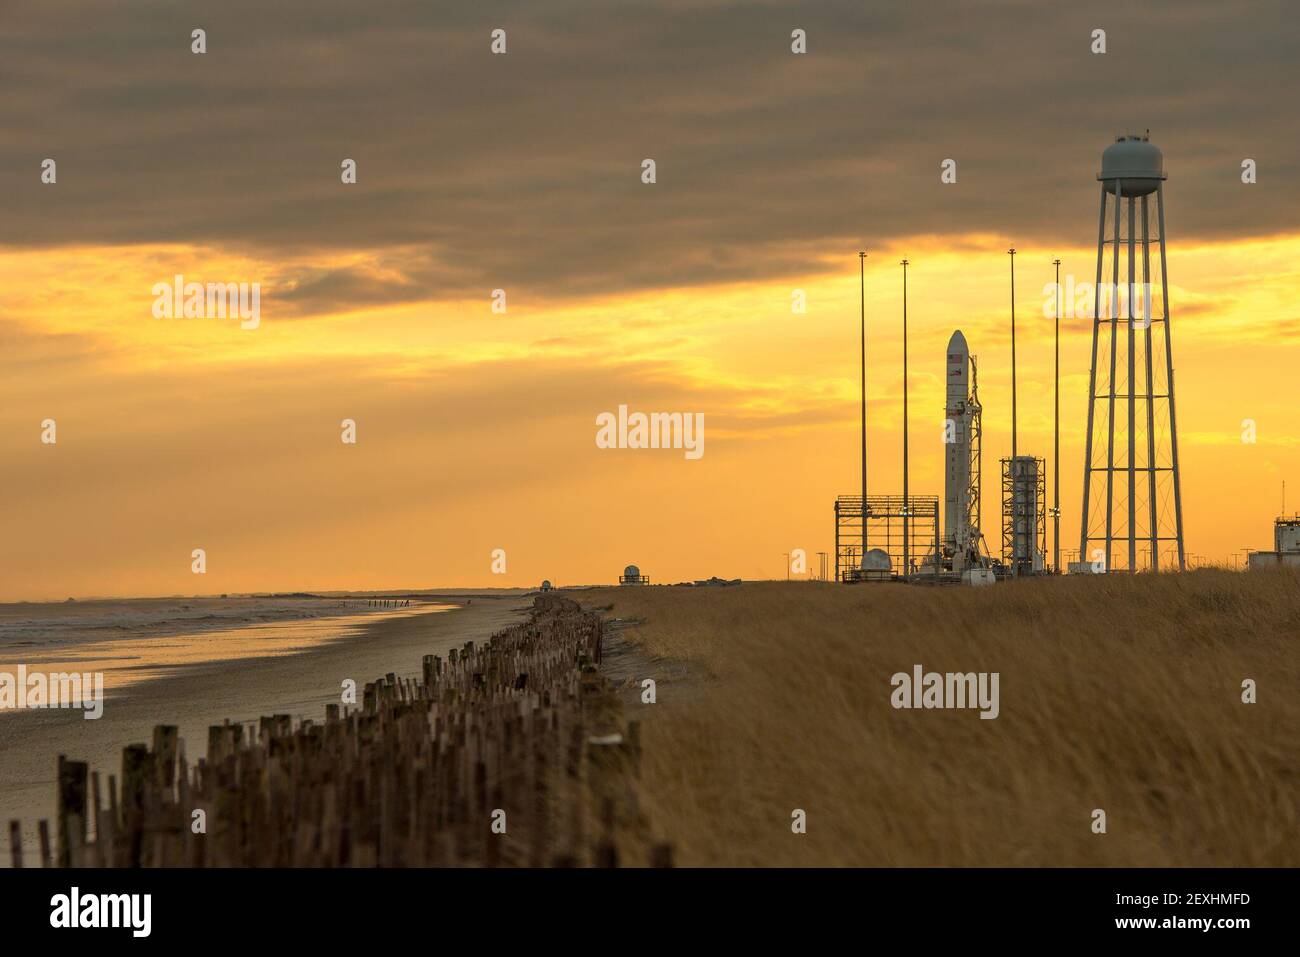 An Orbital Sciences Corporation Antares rocket is seen on launch Pad-0A at NASA's Wallops Flight Facility, Monday, Jan.6, 2014 in advance of a planned Wednesday, Jan. 8th, 1:32 p.m. EST launch. The Antares will launch a Cygnus spacecraft on a cargo resupply mission to the International Space Station. The Orbital-1 mission is Orbital Sciences' first contracted cargo delivery flight to the space station for NASA. Among the cargo aboard Cygnus set to launch to the space station are science experiments, crew provisions, spare parts and other hardware. Image Credit: Bill Ingalls/NASA/Sipa USA Stock Photo